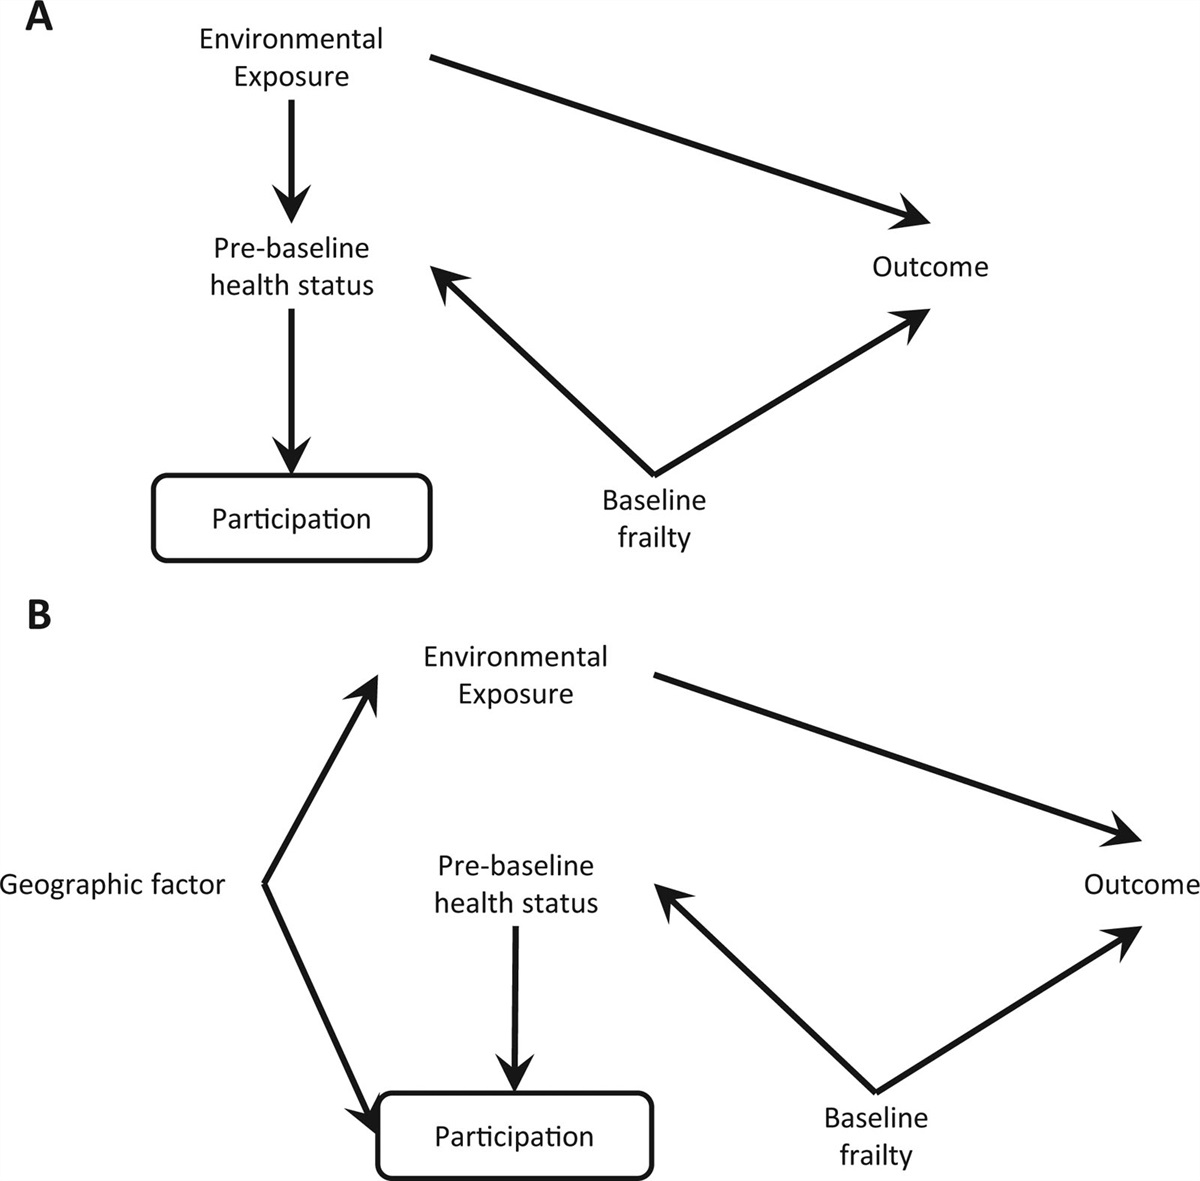 Differential Participation, a Potential Cause of Spurious Associations in Observational Cohorts in Environmental Epidemiology